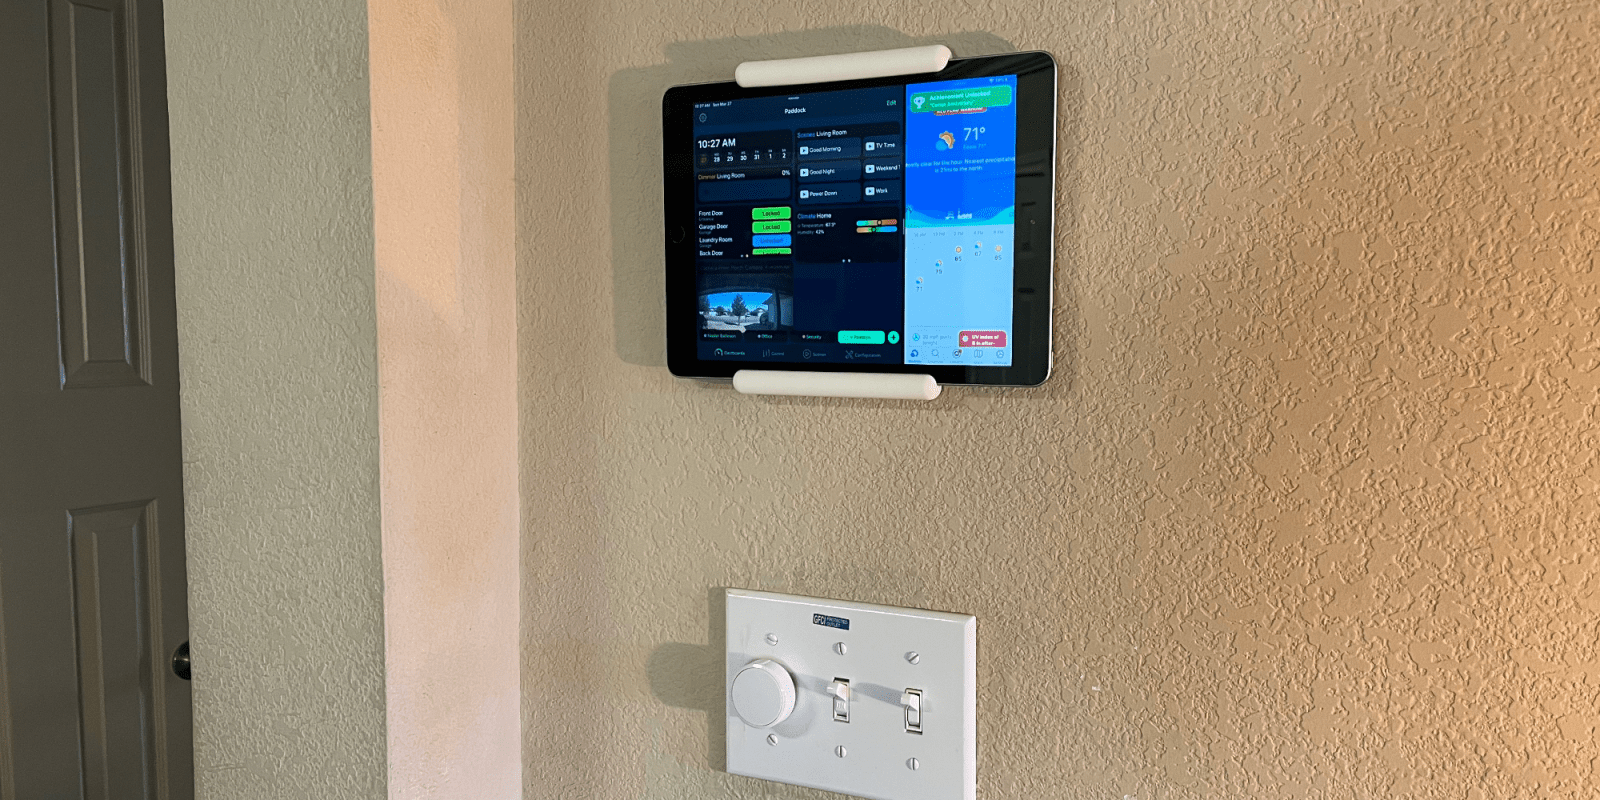 Homekit Weekly Have An Old Ipad Lying Around Add A 20 Wall Mount And Turn It Into Controller 9to5mac